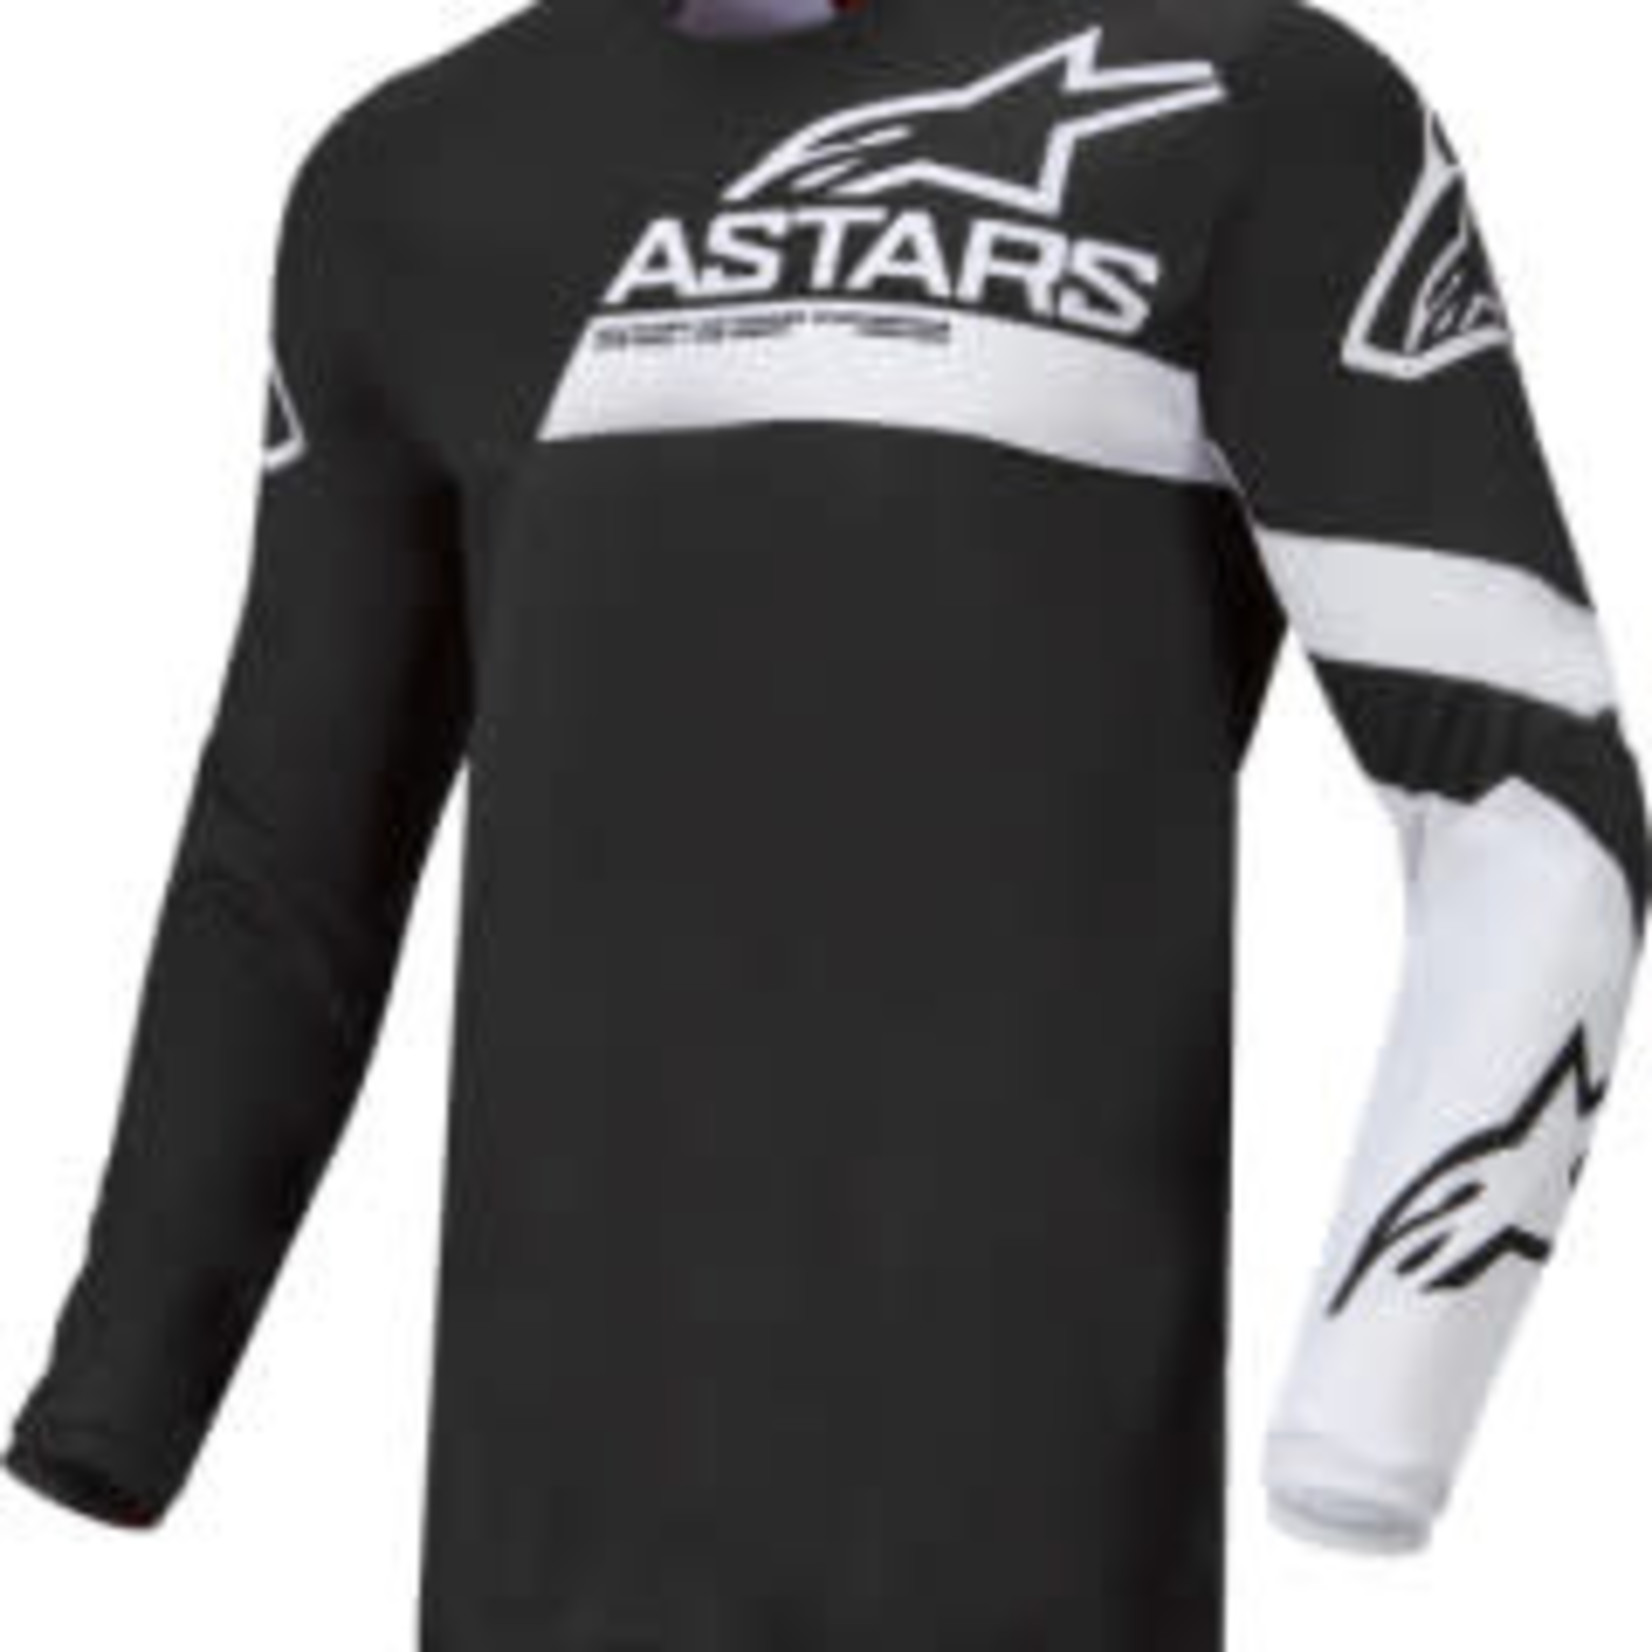 ALPINESTARS Youth Racer Chaser Jersey